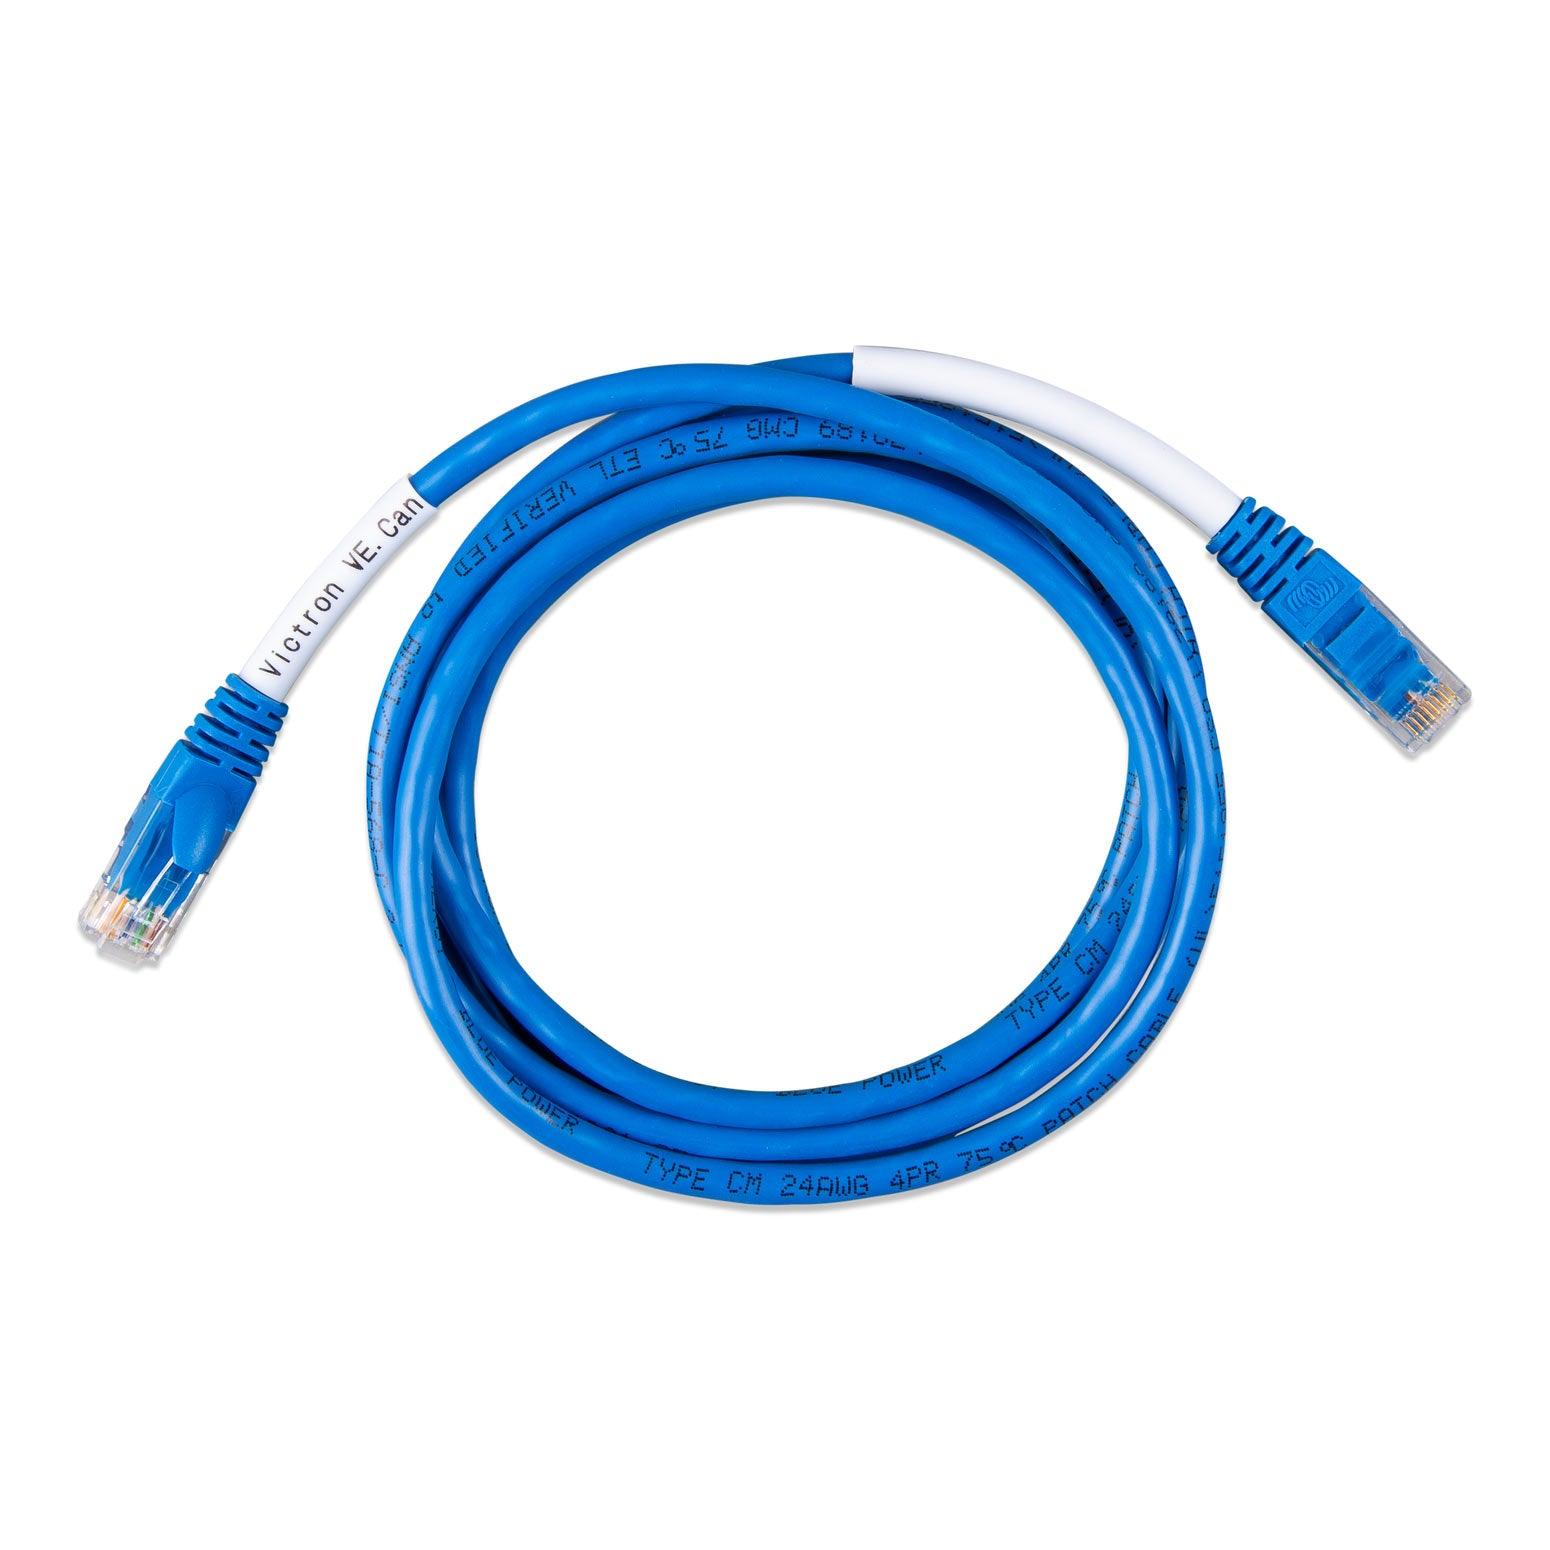 Victron VE.Can to CAN-bus BMS type A Cable 1.8 m - ASS030710018 - VoltaconSolar